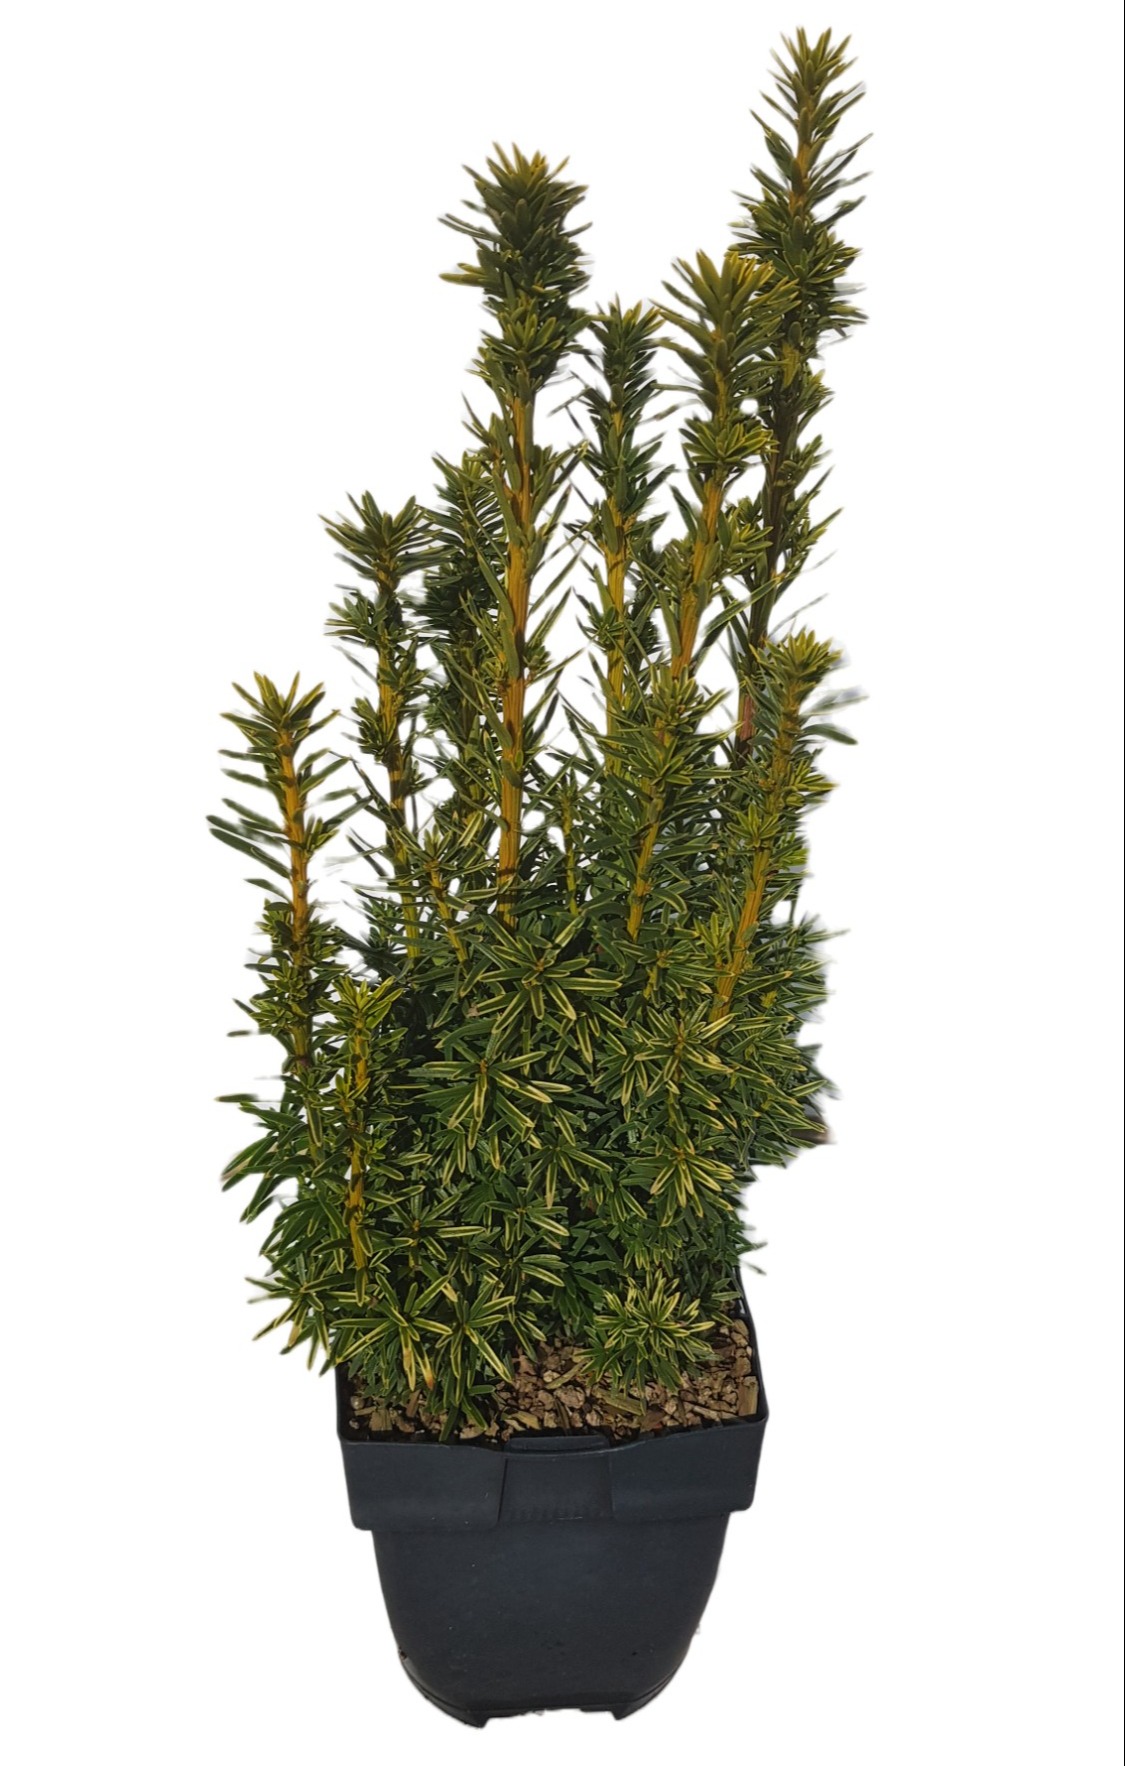 Picture of Taxus baccata 'David' P17